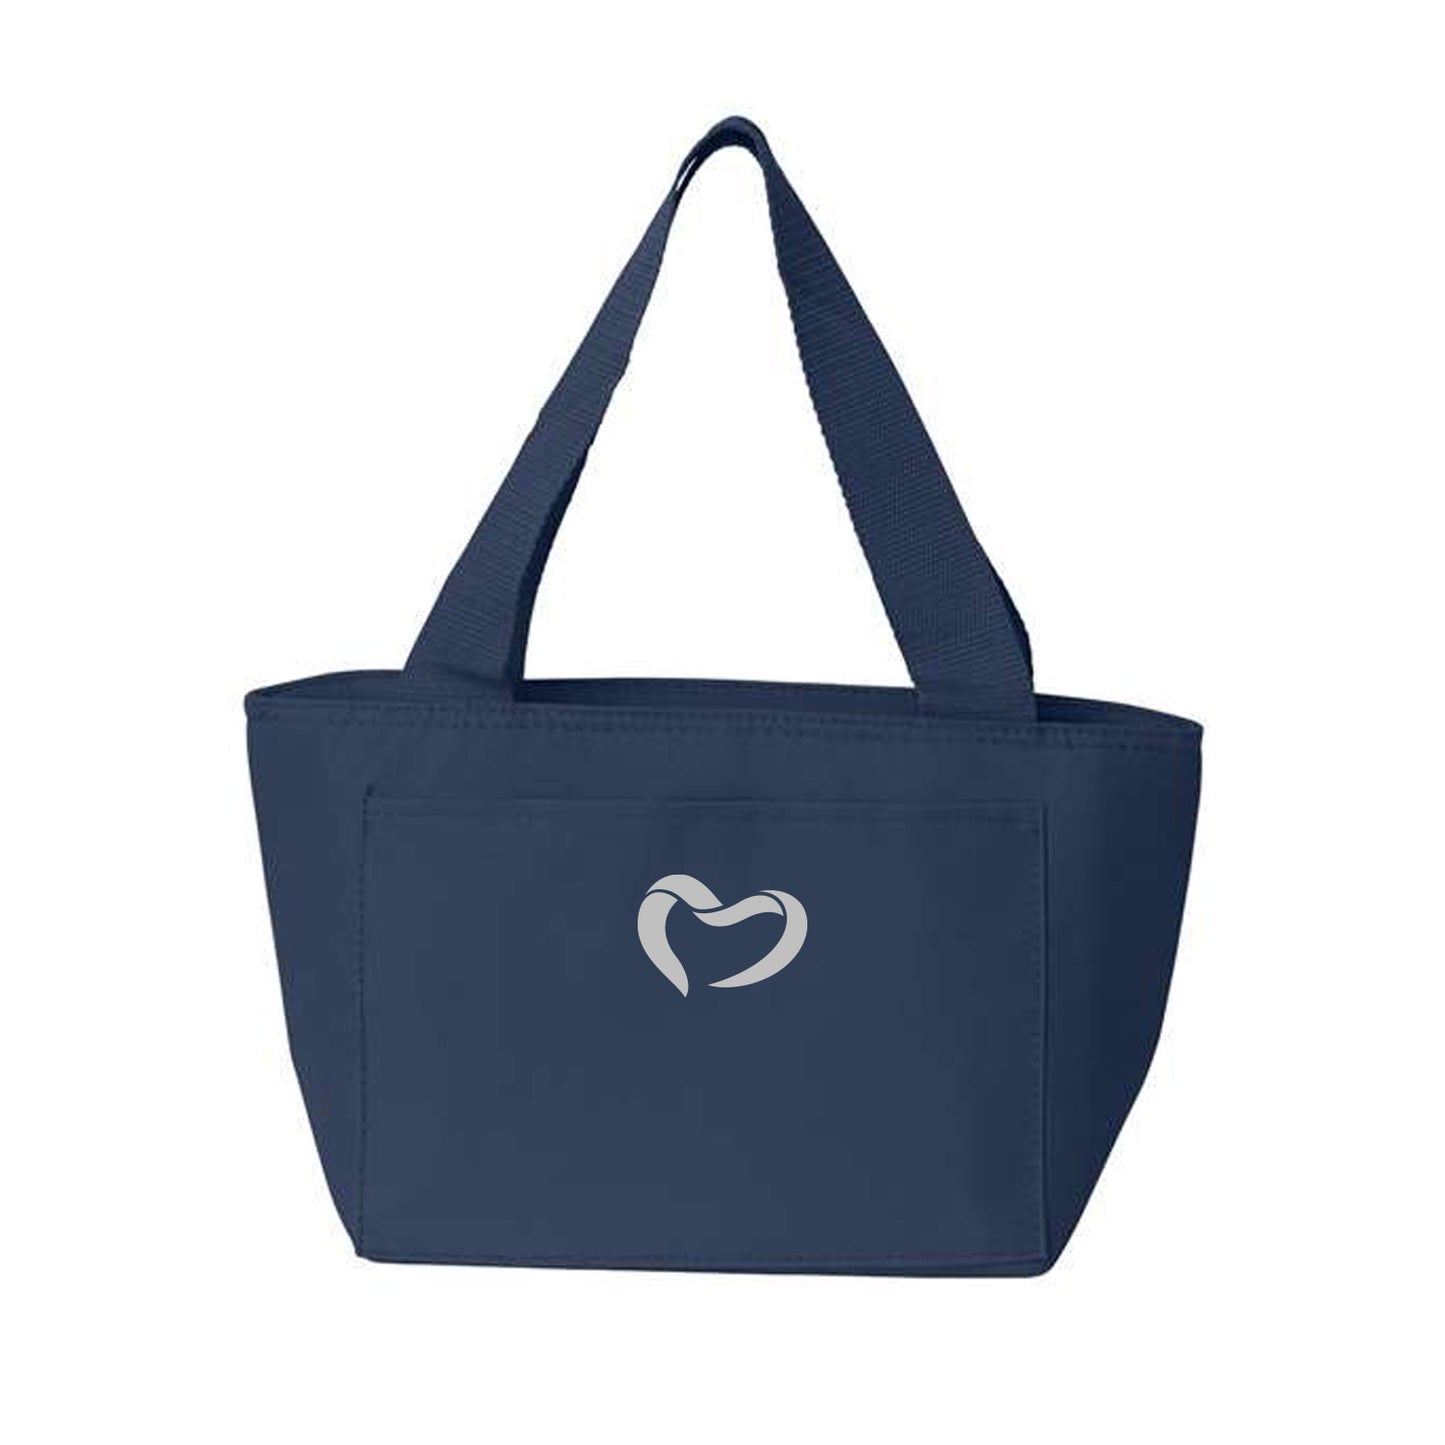 Navy Cooler Bag W/ Silver Embroidered Heart Logo